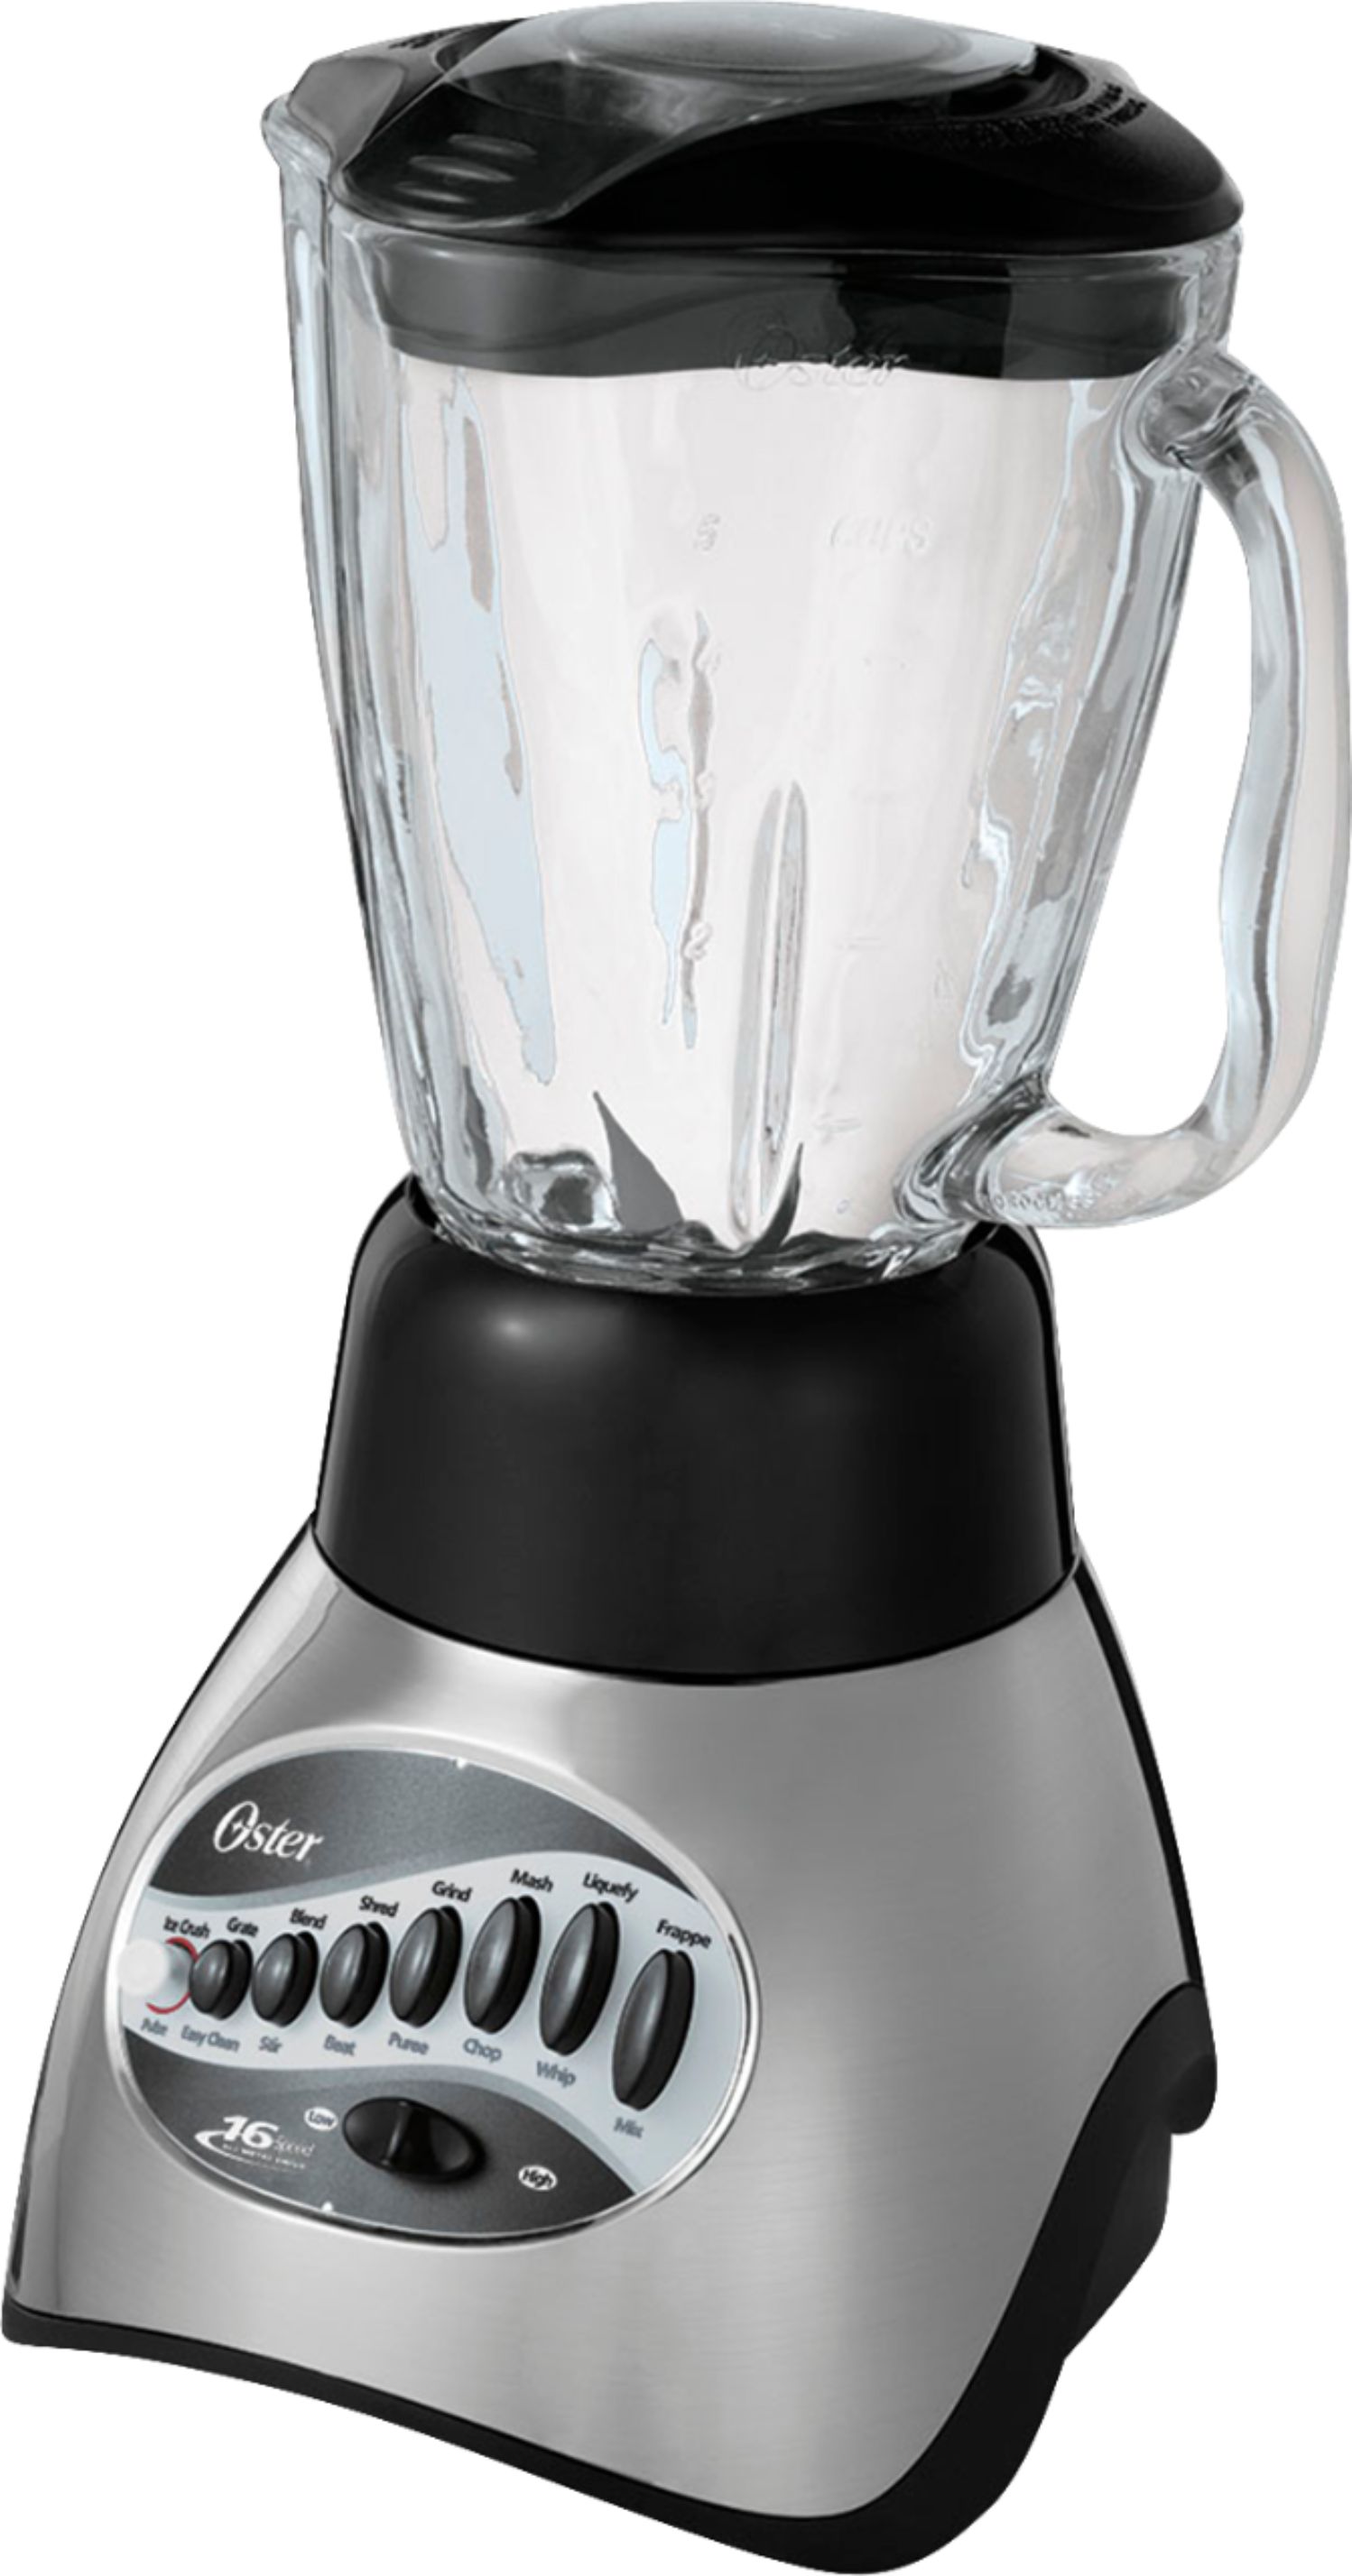 Oster® Classic Series Blender with Reversing Blade Technology and Glass Jar,  Brushed Nickel